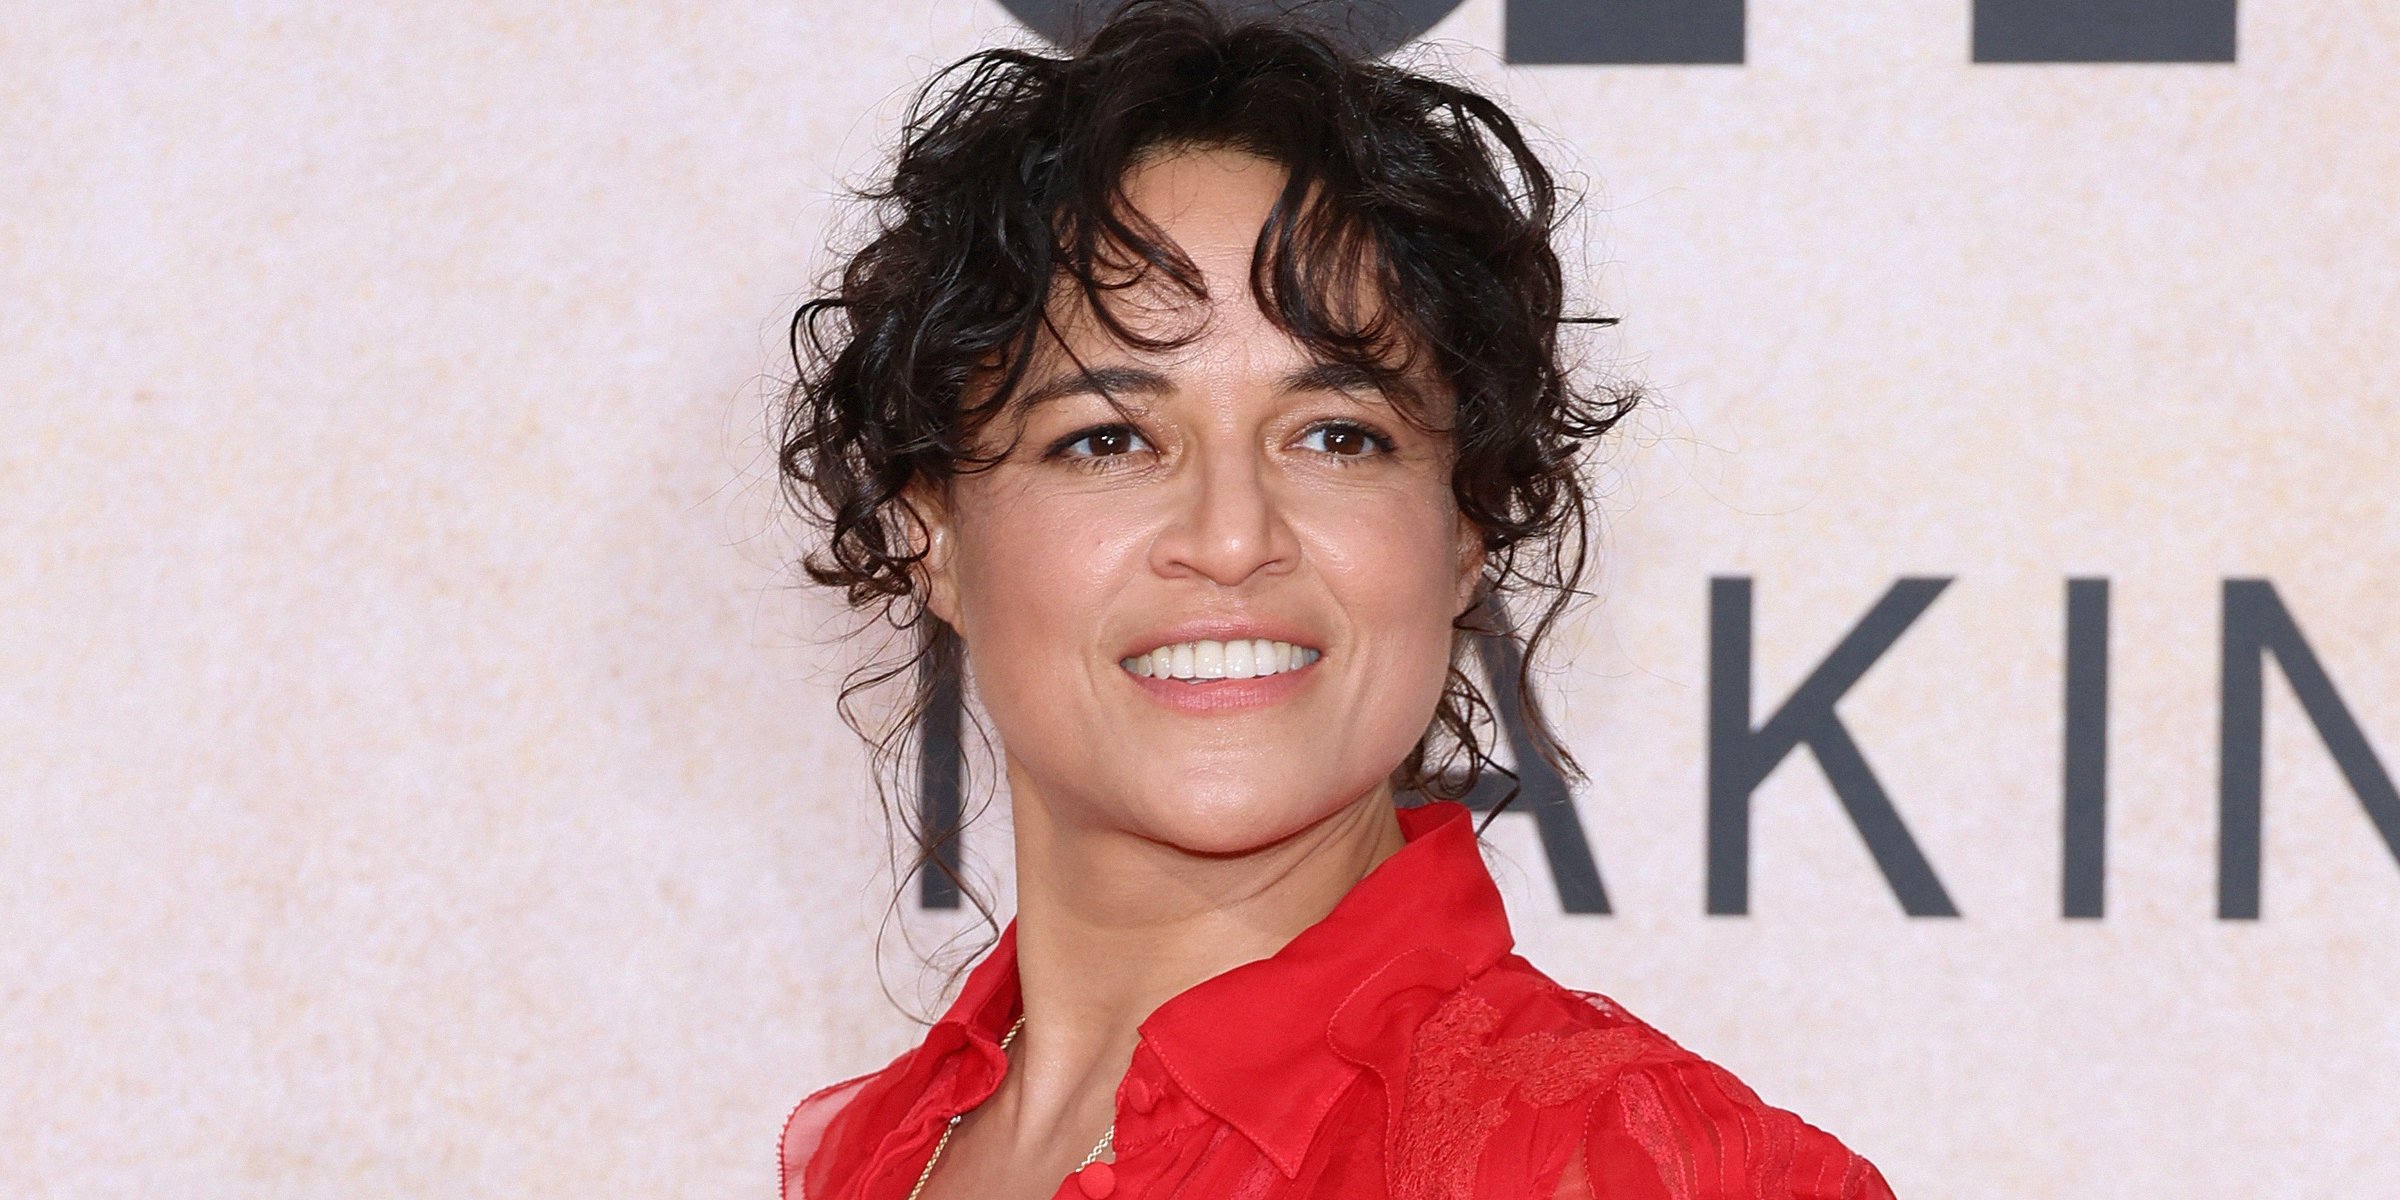 Michelle Rodriguez's Dating History Includes Both Men and Women